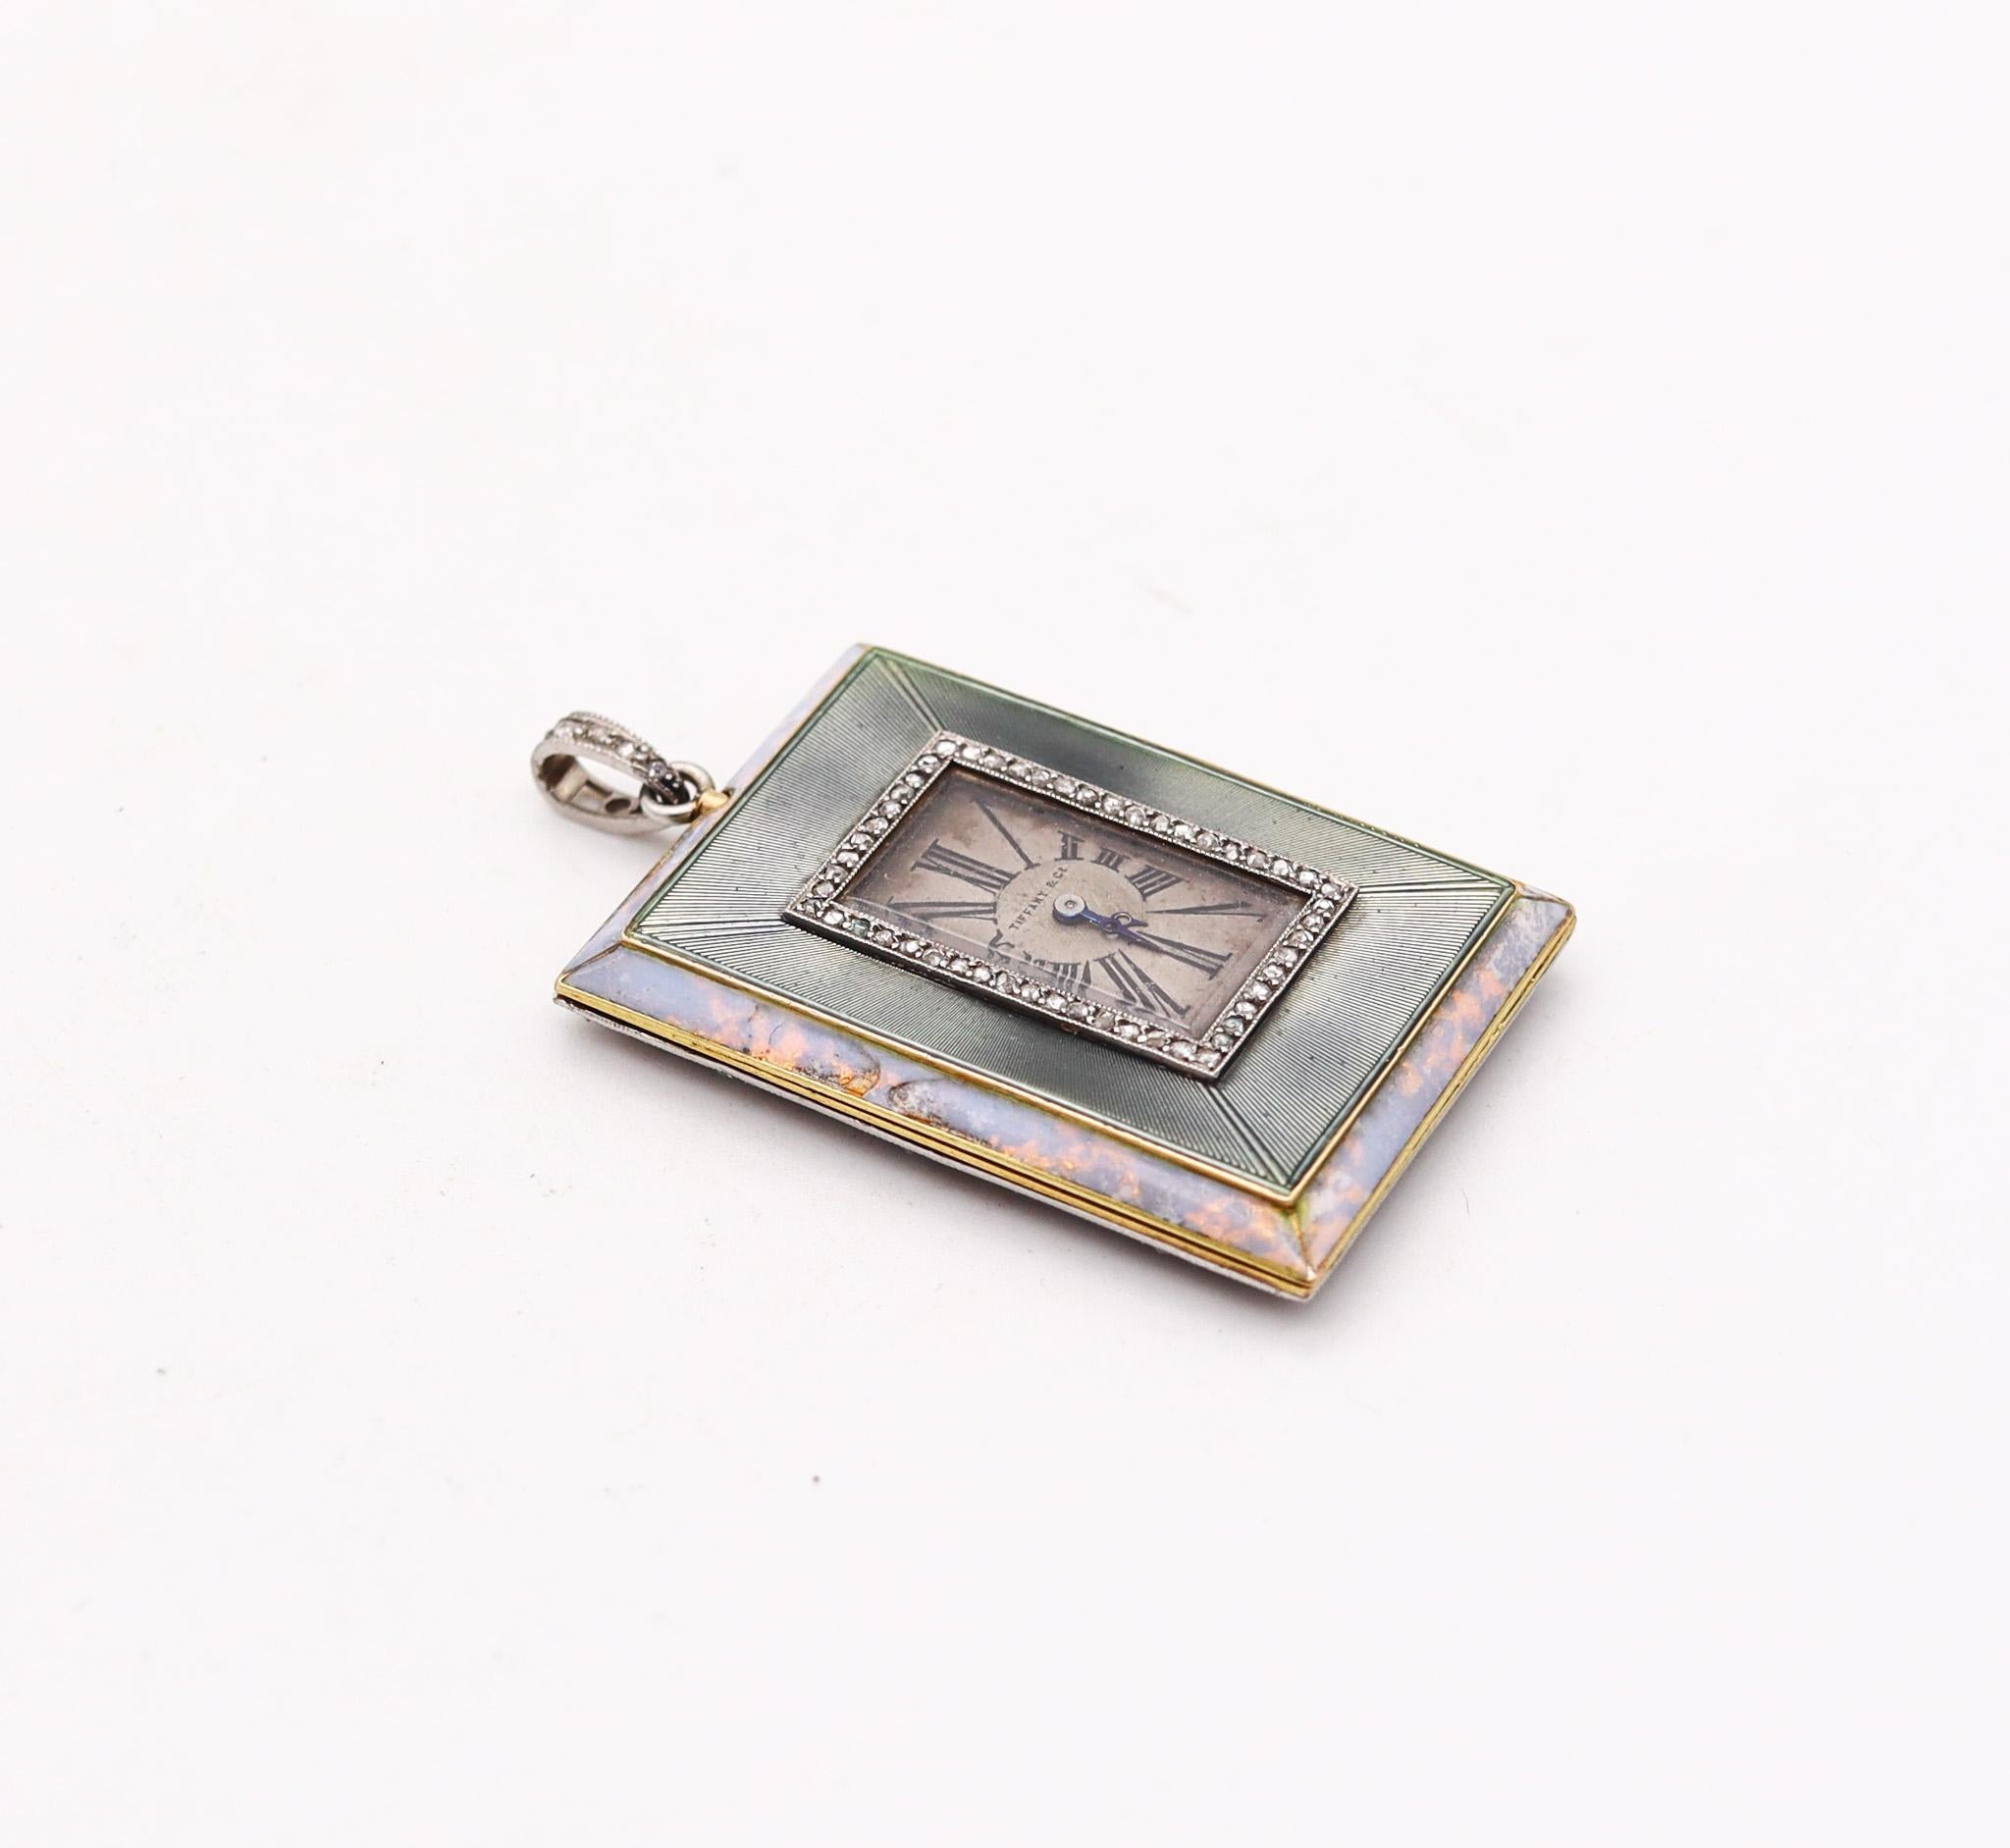 Edwardian Enamel Pendant Watch By Verger Freres For Tiffany & Co.

Very fine and rare pendant watch, created during the Edwardian period in Paris France by Verger Freres for Tiffany & Co., back in the 1910. Crafted with rectangular shape in solid